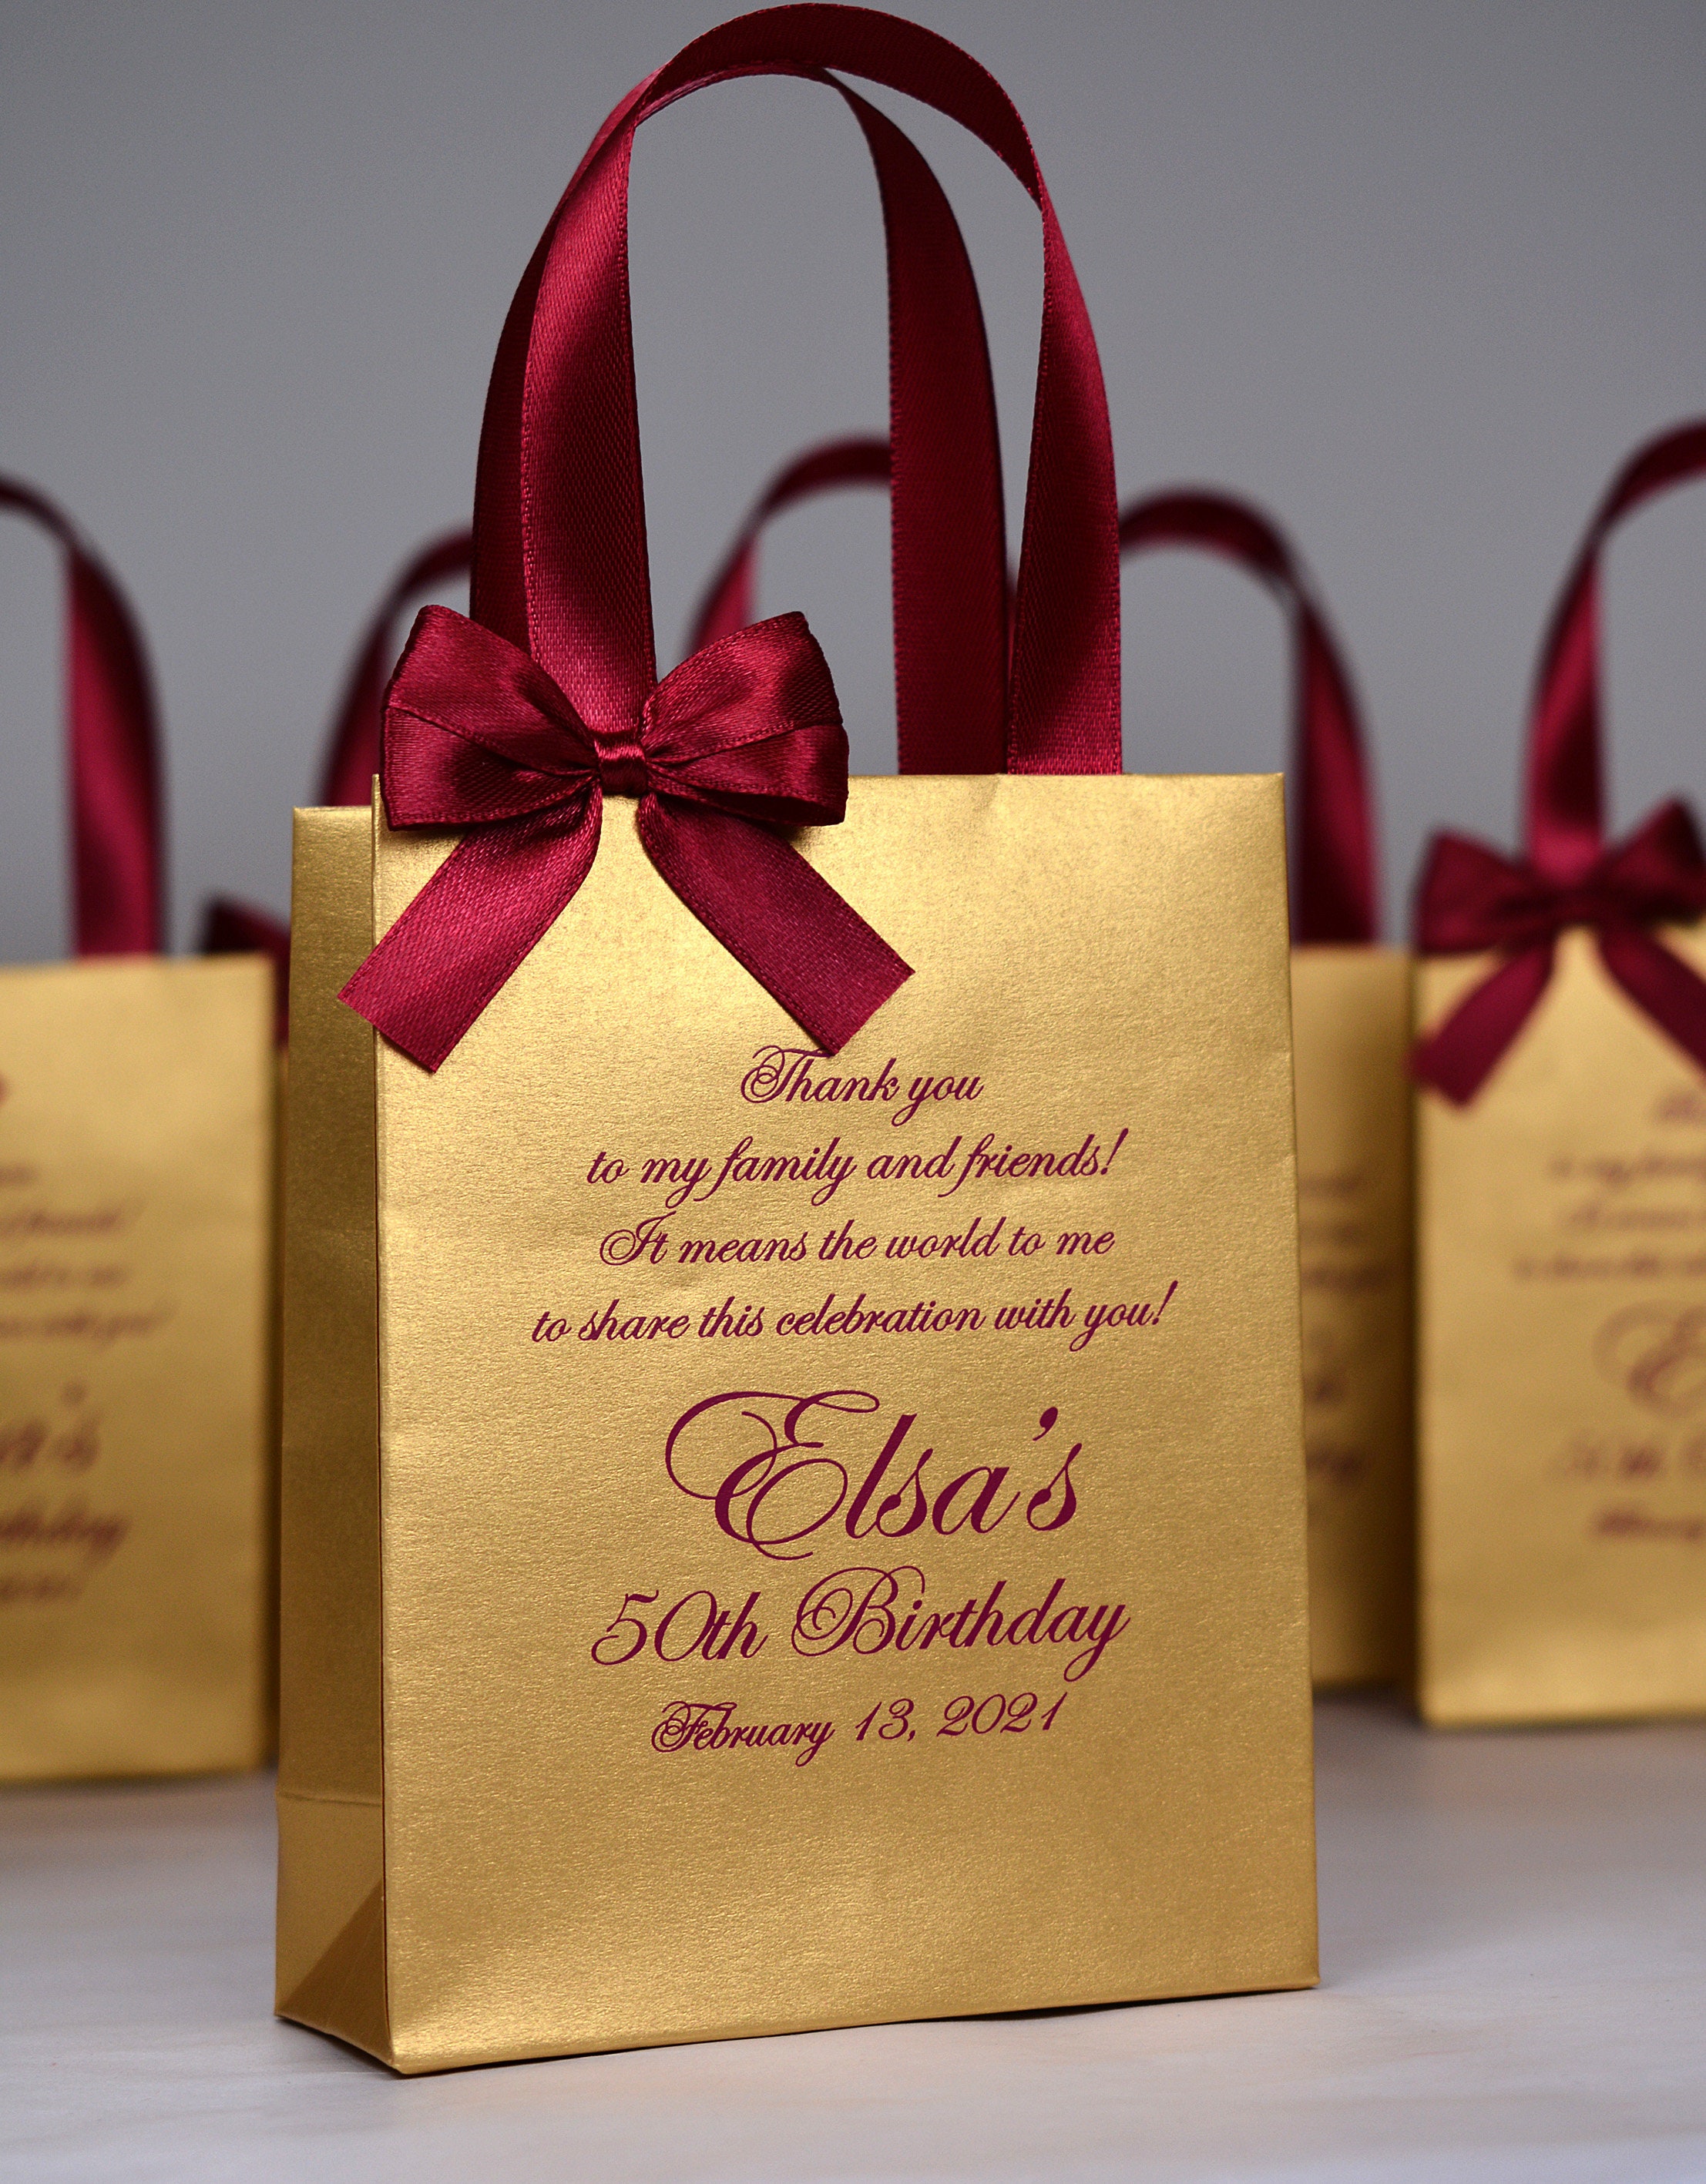 25 Birthday Party Favor Bags With Gold Satin Ribbon Handles, Bow and Your  Name, Elegant 55th and Fabulous Rose Gold Personalized Gift Bags 